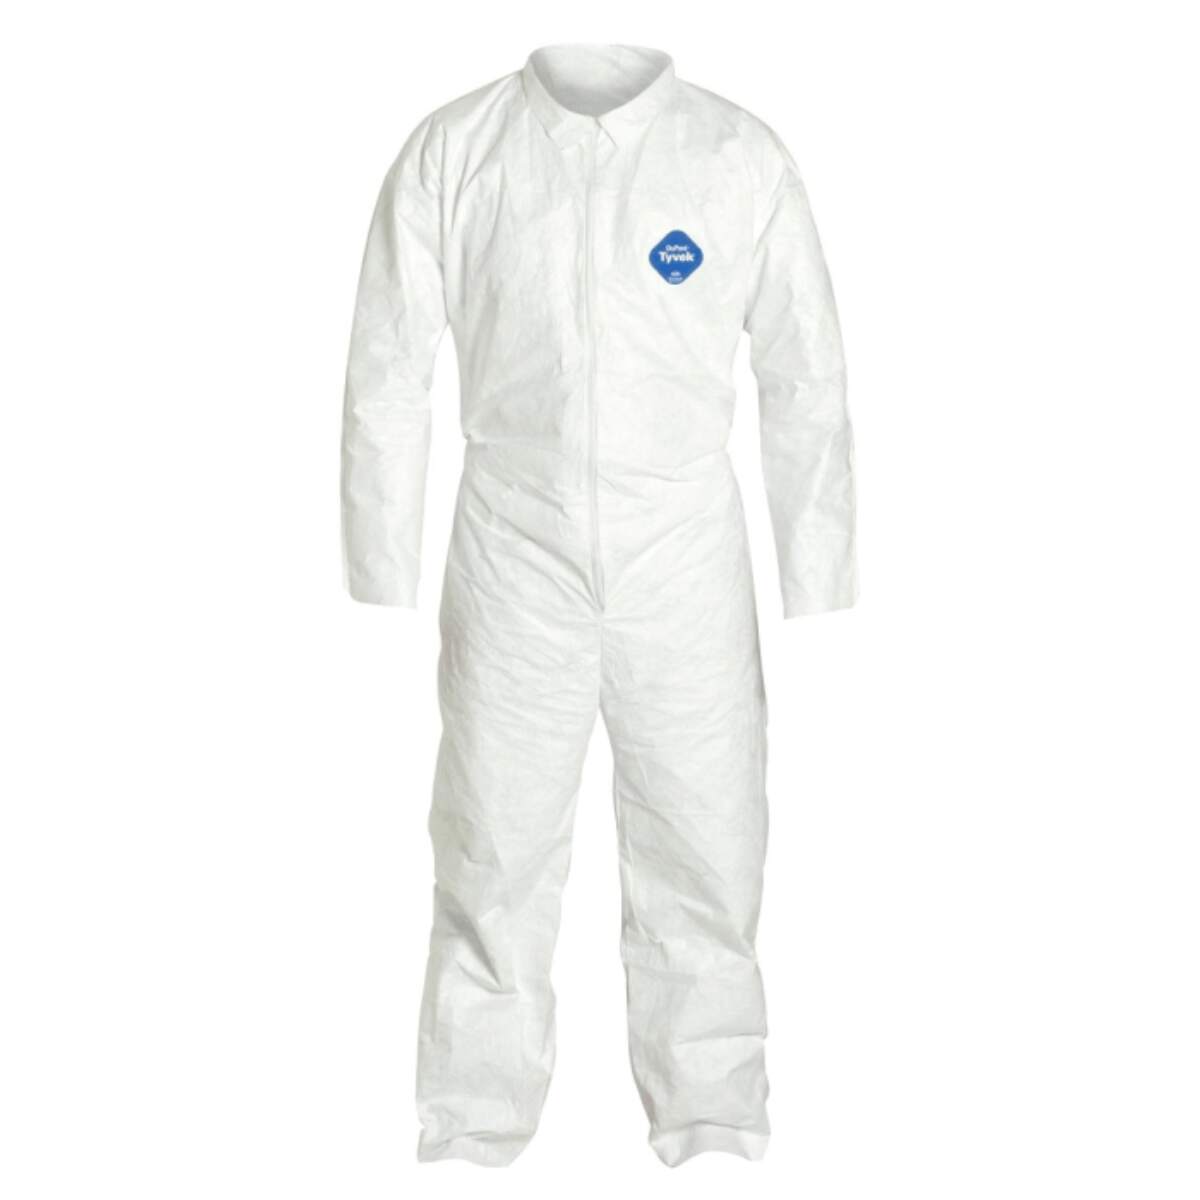 tyvek coverall- safety products supplier - landmark congo sarl